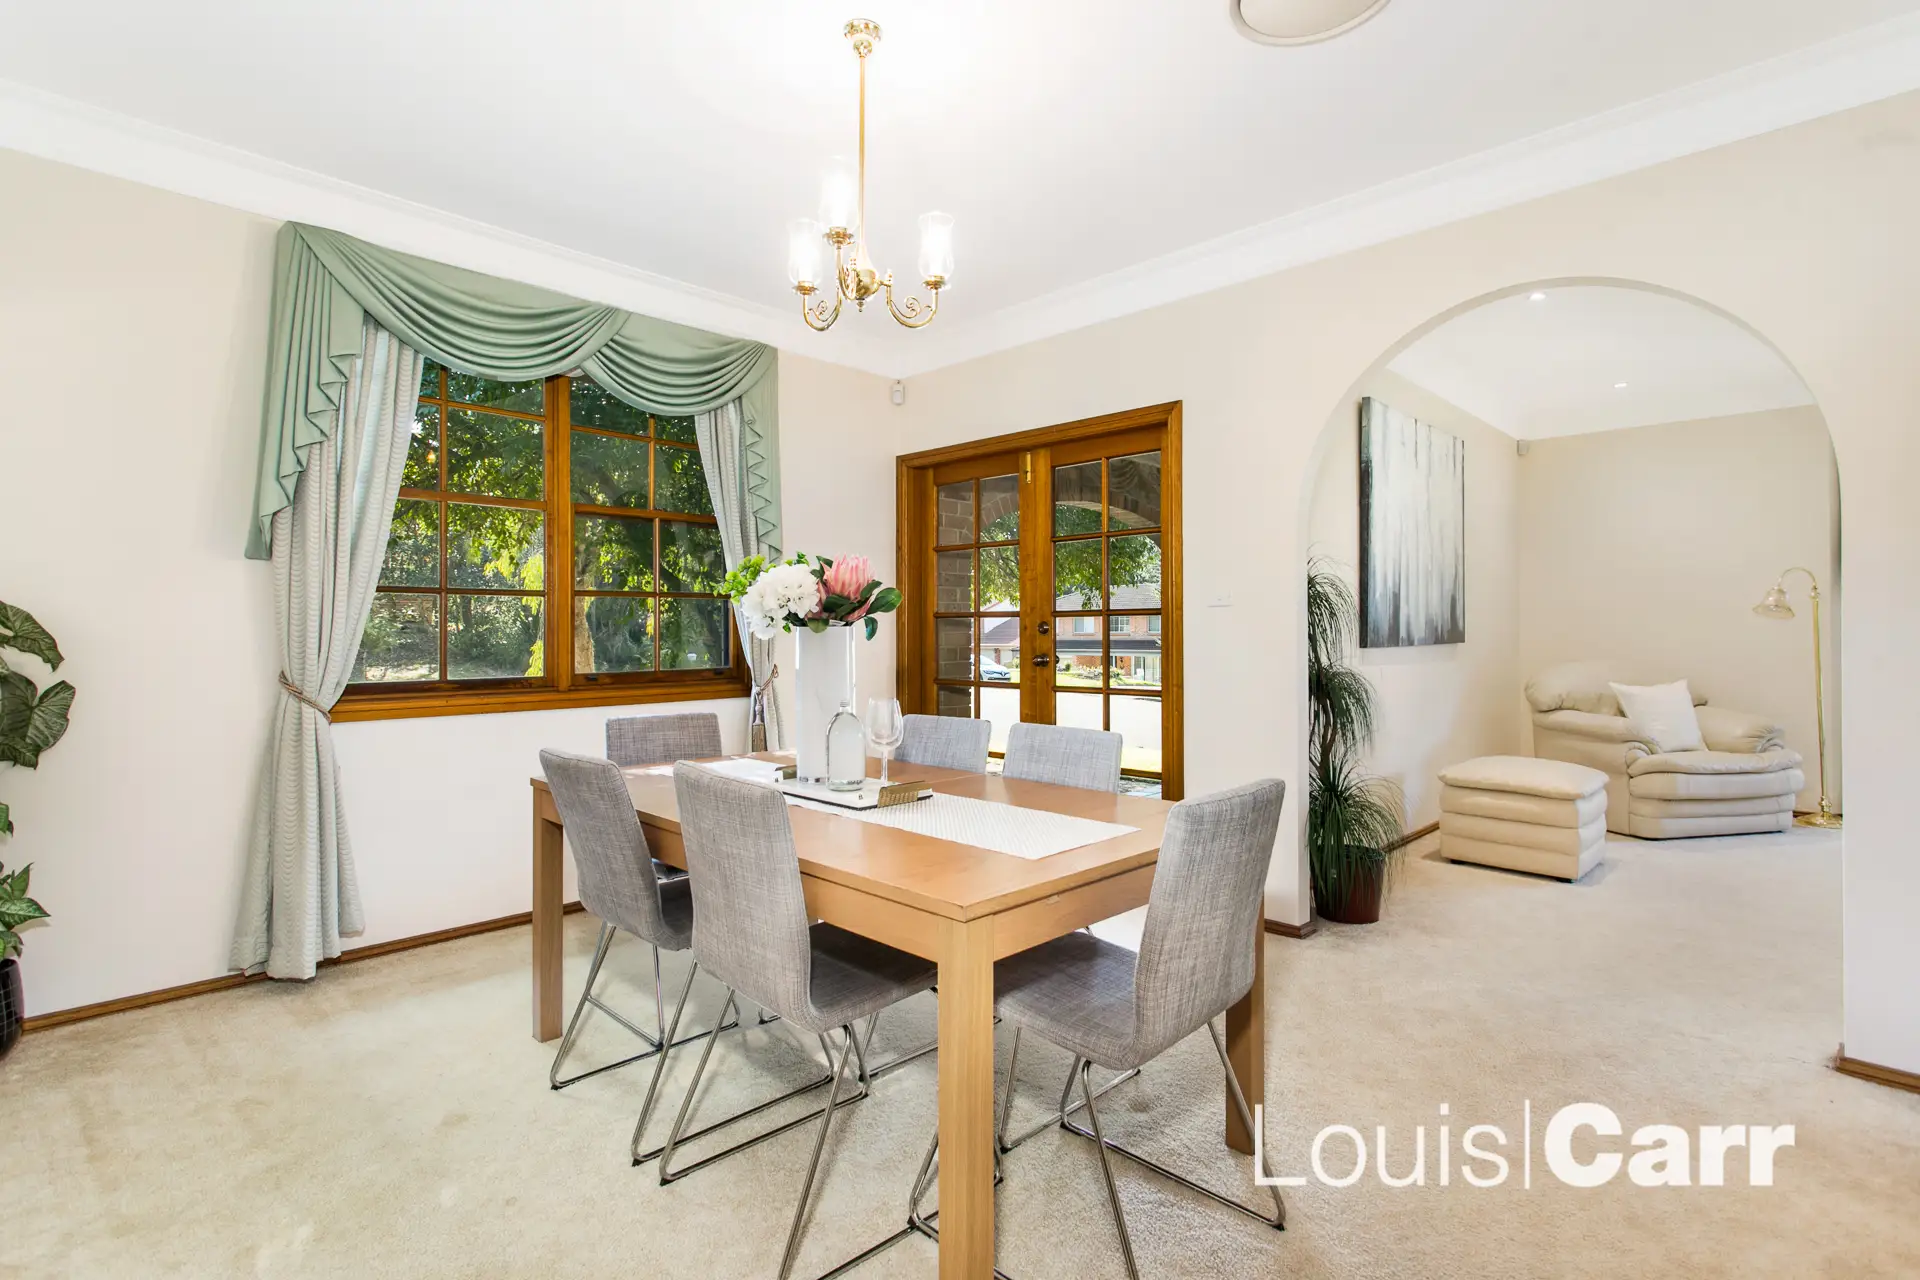 Photo #10: 33 Casuarina Drive, Cherrybrook - Sold by Louis Carr Real Estate